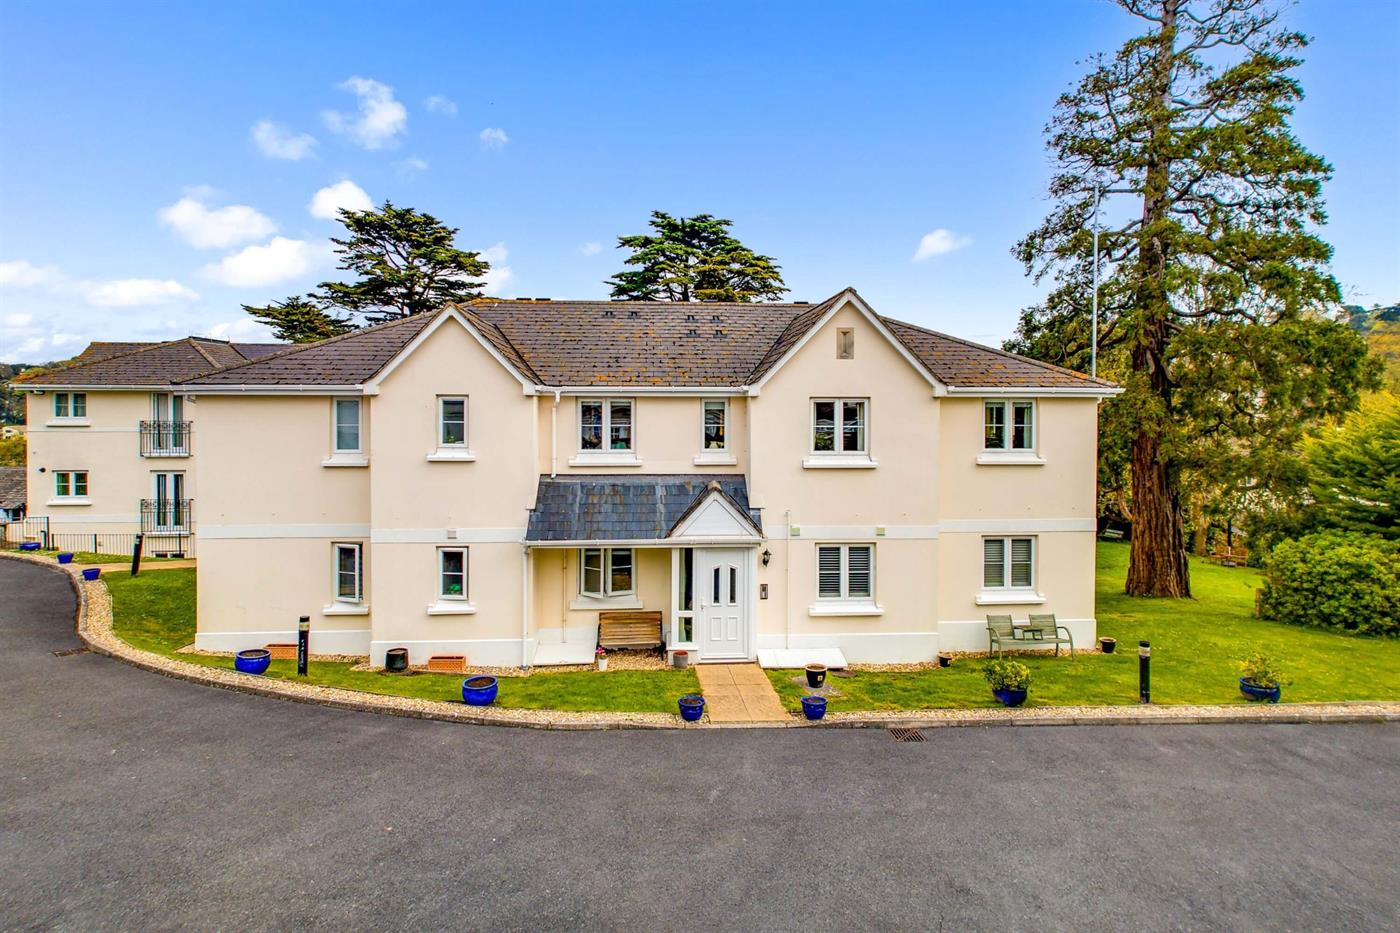 2 Bedroom Apartment for Sale: Meadfoot Grange, Meadfoot Road, Torquay, TQ1 2LR